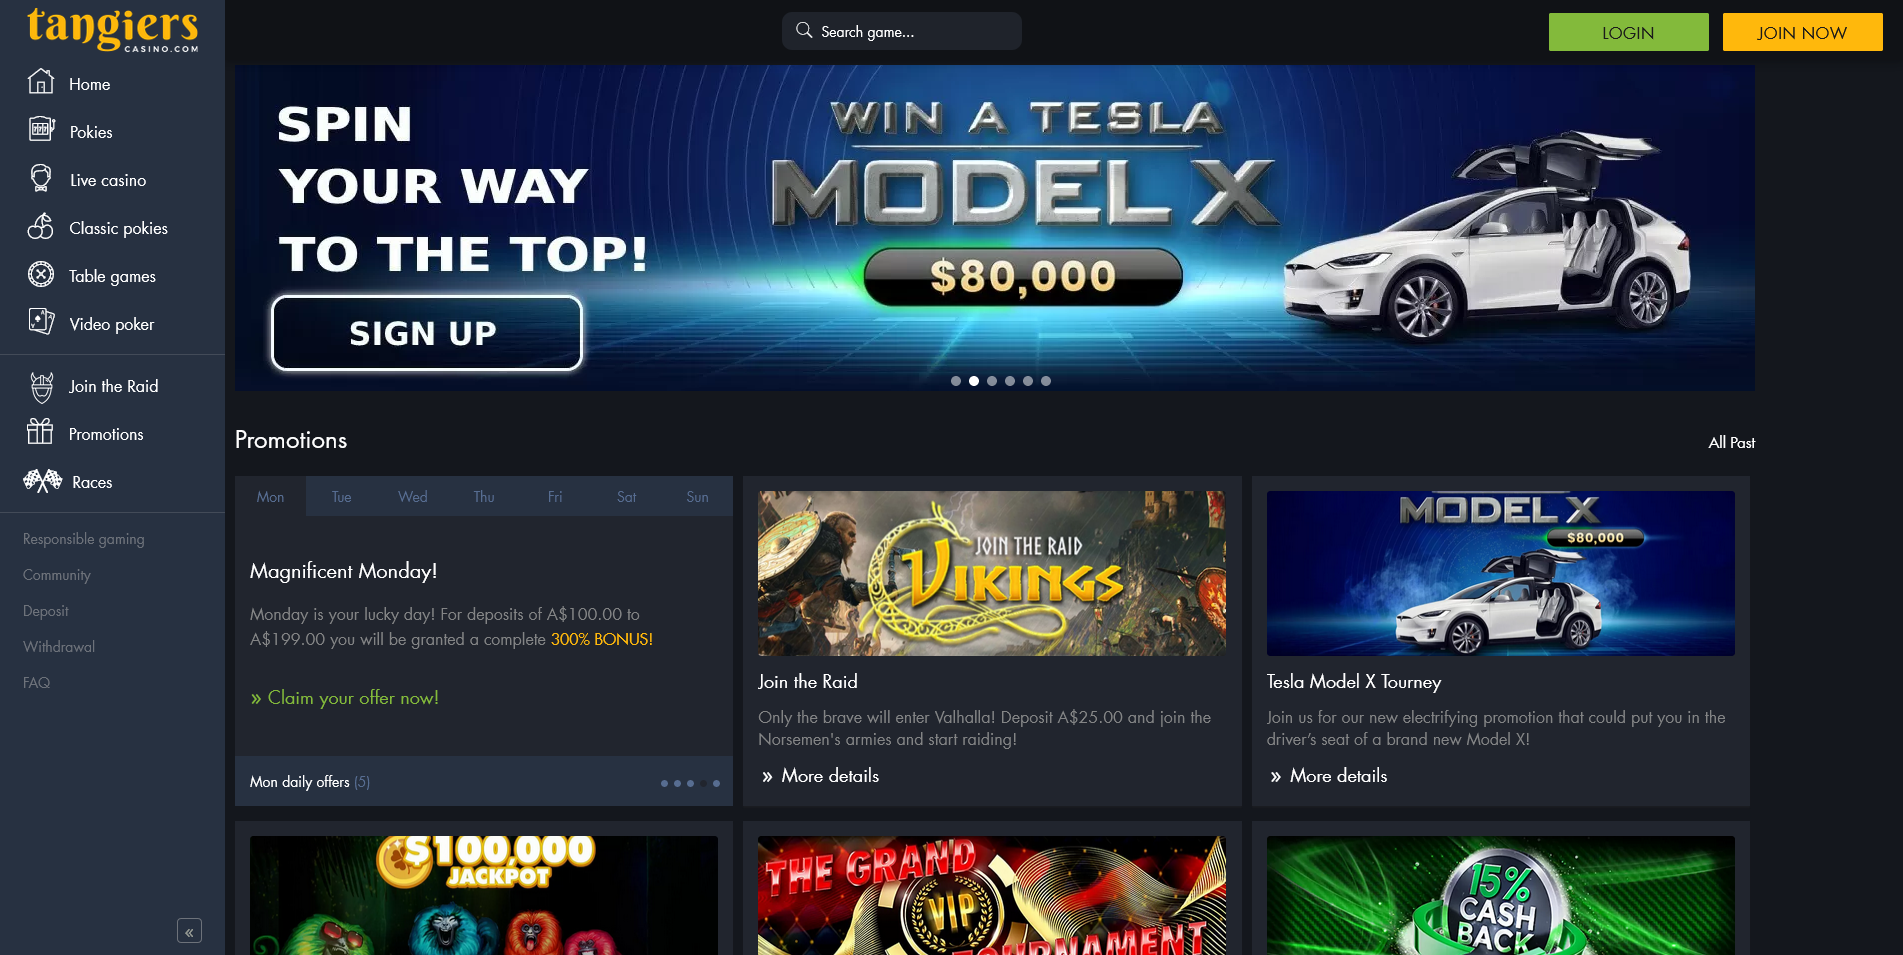 Screenshot of Promotions Page on Tangiers Casino site